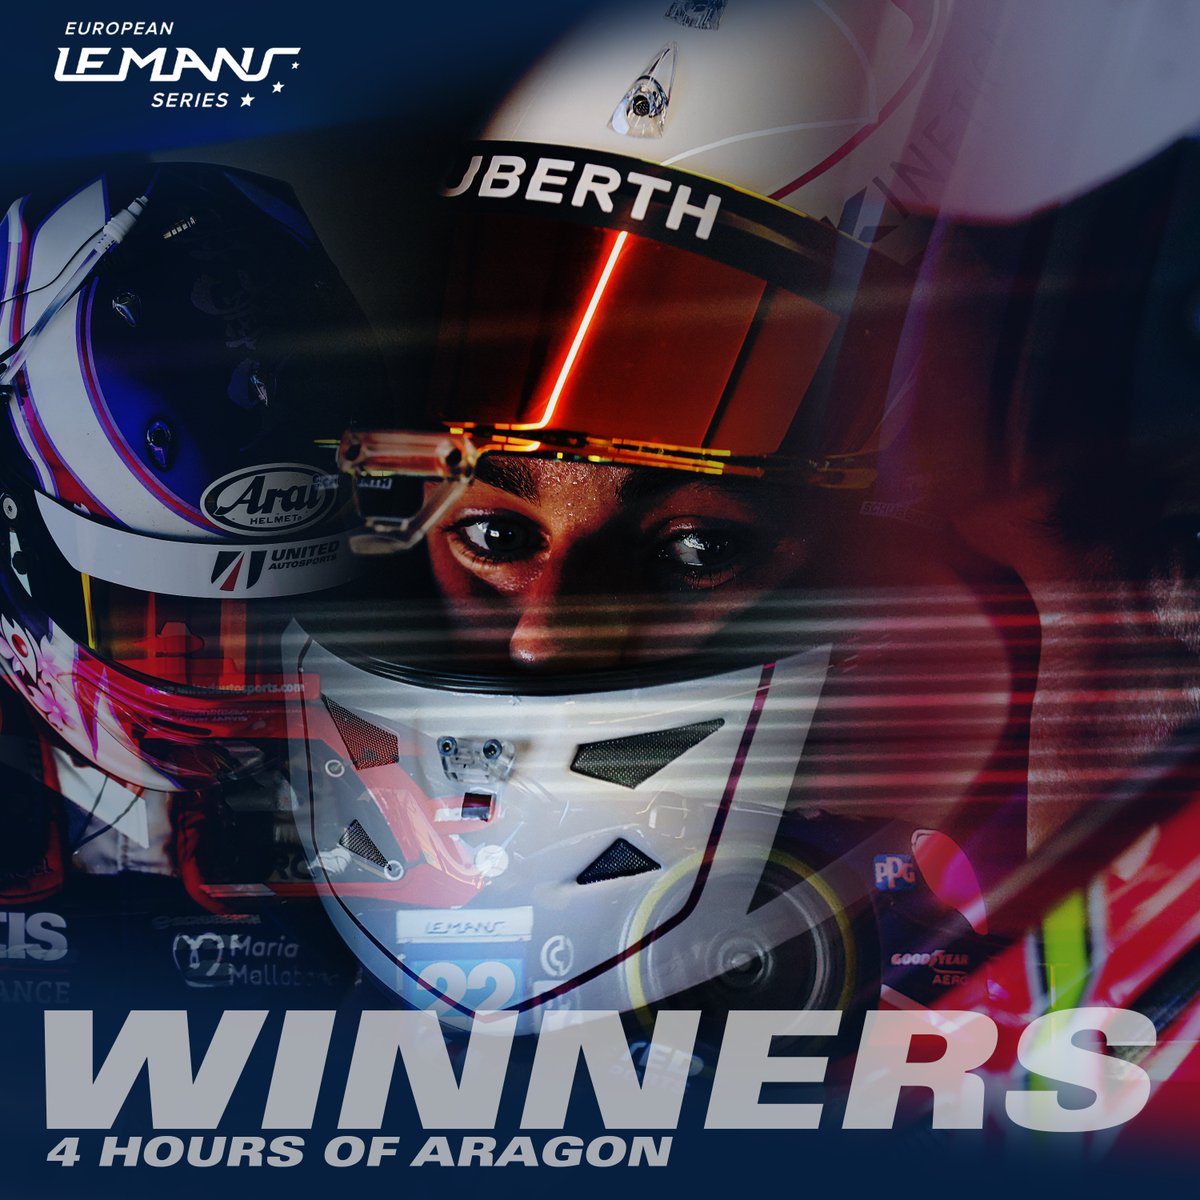 YOUR WINNERS! 🏆 What a drive from the #22 crew, starting on pole and storming home to take P1 in the #4HAragon. The car was mega, the pit stops were flawless and #PhilHanson, @ollyjarvis and @SATO_MARiNO – you gave it your all out there. To the podium ... 🍾 #BeUnited…